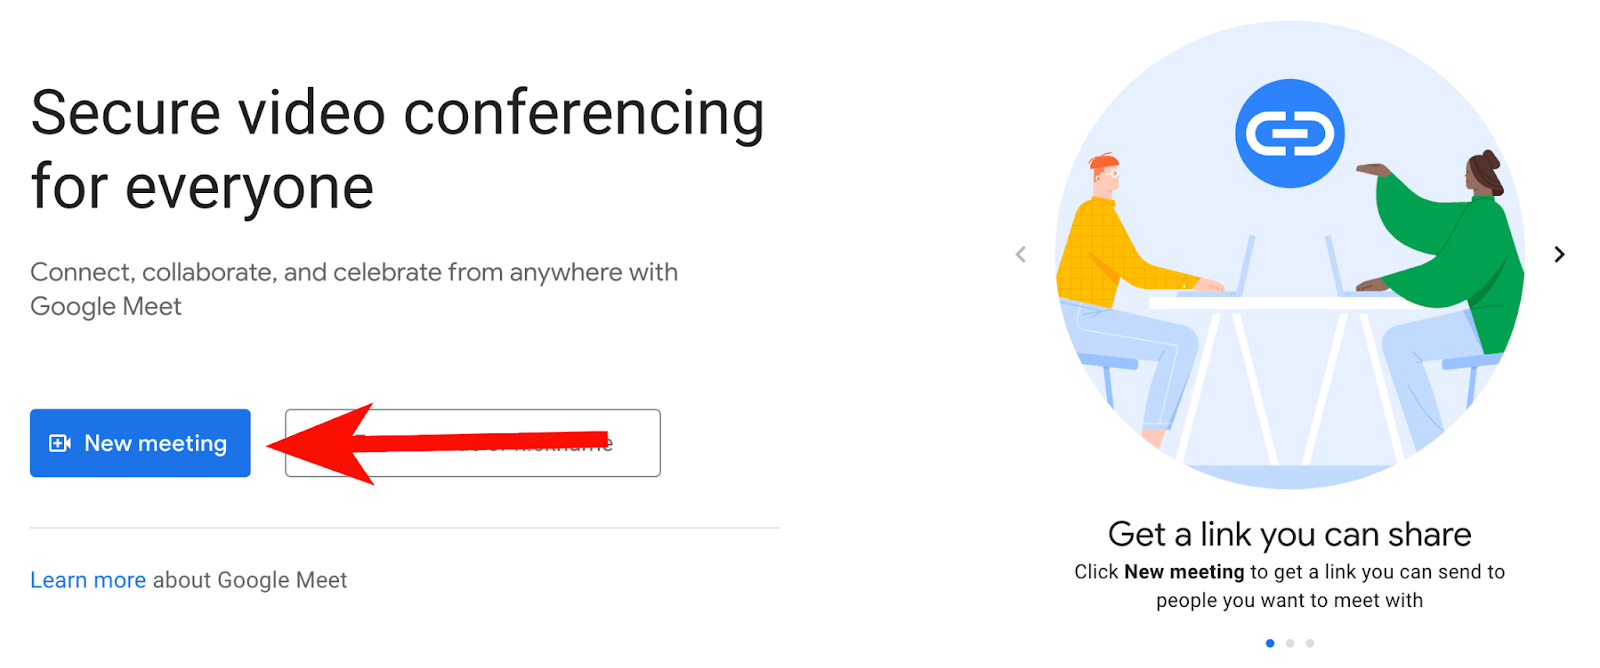 A red arrow points New Meeting on Google Meet homepage.